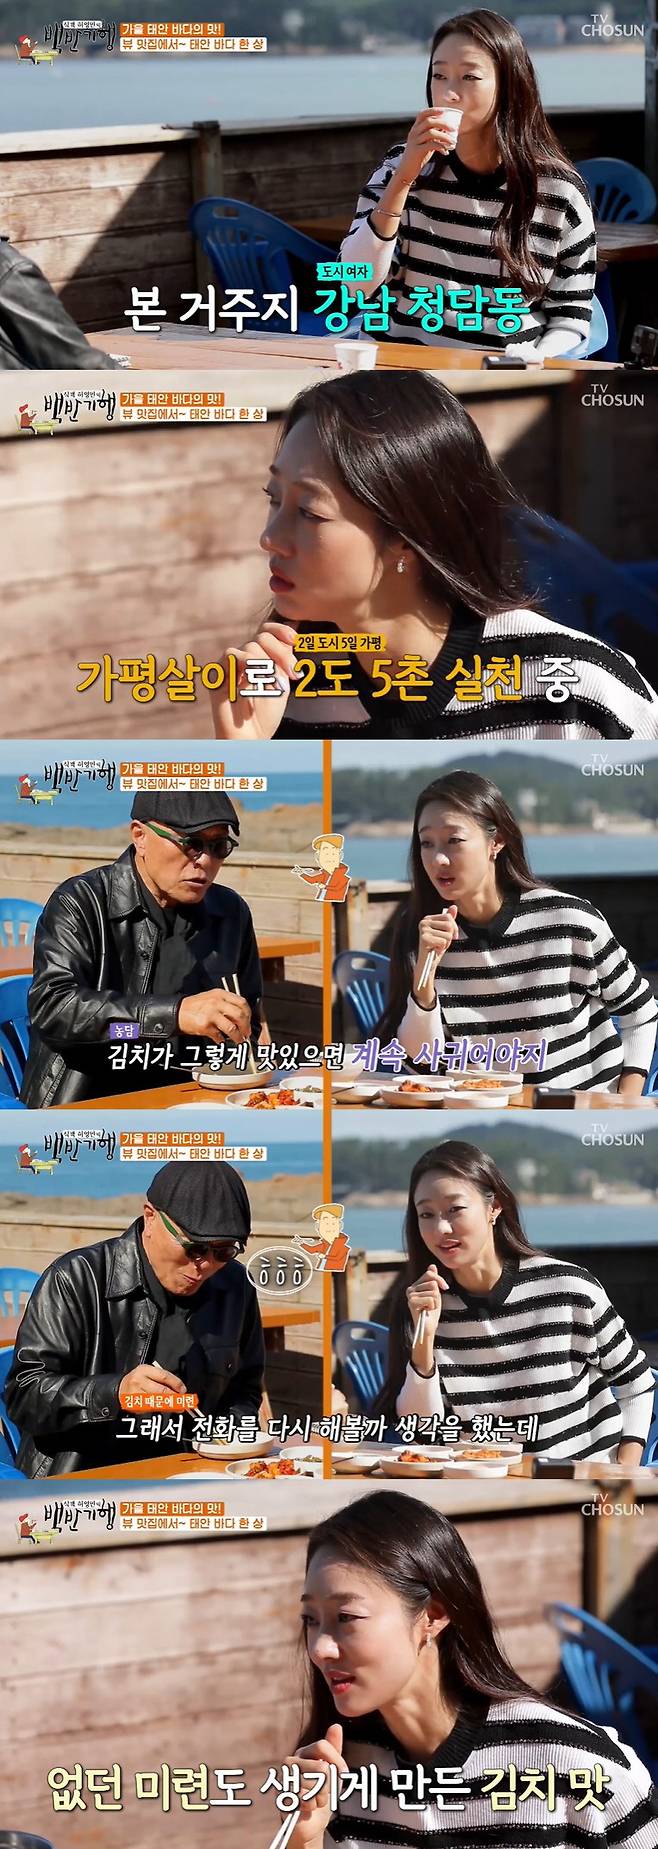 White Half Travel Choi Yeo-jin told Canada why he had to go to Vallejo.Actor Choi Yeo-jin visited Taean restaurant on the 5th TV Chosun Huh Young-mans White Travel.Choi Yeo-jins first destination was the Parksokmukguk octopus. Choi Yeo-jin, who lived in Canada, actually saw Park for the first time.Huh Young-man asked why he went to Canada and Choi Yeo-jin said: I did dance.I was worried about the economic part, so I wanted to go abroad and study and get better. Huh Young-man wondered, Do not you go abroad? Choi Yeo-jin said, Even when I was a child, my perception of the divorce family was not as open as it is now.I also had The Complex, so I thought it would be better if I went there. Choi Yeo-jin, who has been playing Vallejo since fifth grade in elementary school, but had to quit Vallejo because of the cost of his school.Choi Yeo-jin said: The English language didnt work, and the Records of the Grand Historian got even harder.I was pushed out of school and stressed out about my lessons, so I finally told my mom, I cant be Vallejo because Im tall. And I didnt go to lessons. The dream of dance was achieved instead through MBC entertainment program Dancing With the Star.Choi Yeo-jin said, I had a sadness about my dream that I could not have done, but I have a lot of attachment because Dancing With the Star is a program that was satisfied with the agency.Choi Yeo-jin said that the main house is in Cheongdam-dong, but mainly stays at the Cheongshim International Academy to stem water leisure.Choi Yeo-jin said he likes water skiing, wake surfing, as well as various exercises, and I like to dance with nature or dance with music.Choi Yeo-jin, who likes Kimchi enough to not eat rice without Kimchi in the table, said, My boyfriends mother, who was a lover, made Kimchi so delicious.I thought Id break up and call back, but I could not collapse in front of Kimchi. But I think about Kimchi. 